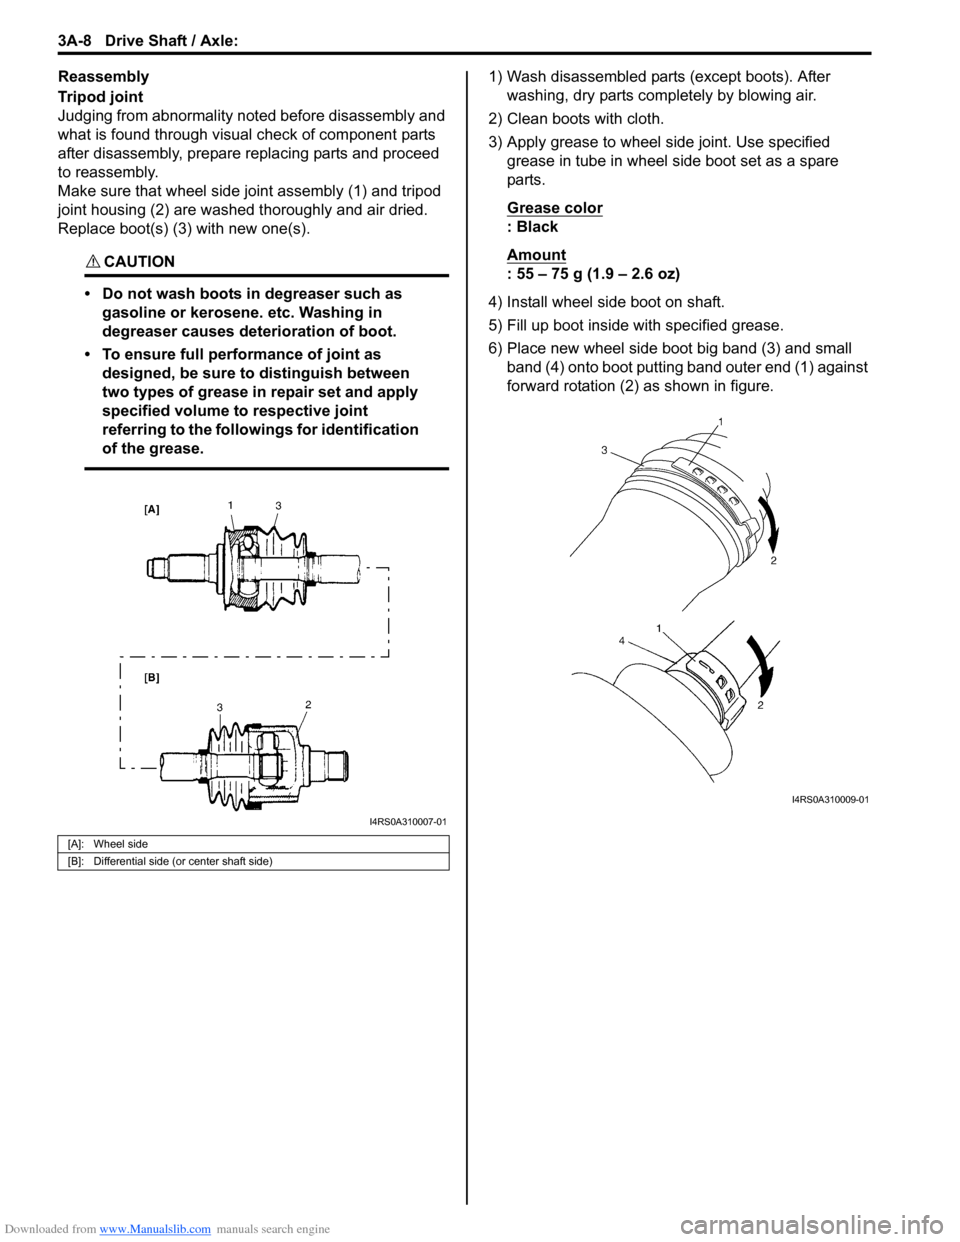 SUZUKI SWIFT 2006 2.G Service Workshop Manual Downloaded from www.Manualslib.com manuals search engine 3A-8 Drive Shaft / Axle: 
Reassembly
Tripod joint
Judging from abnormality noted before disassembly and 
what is found through visual check of 